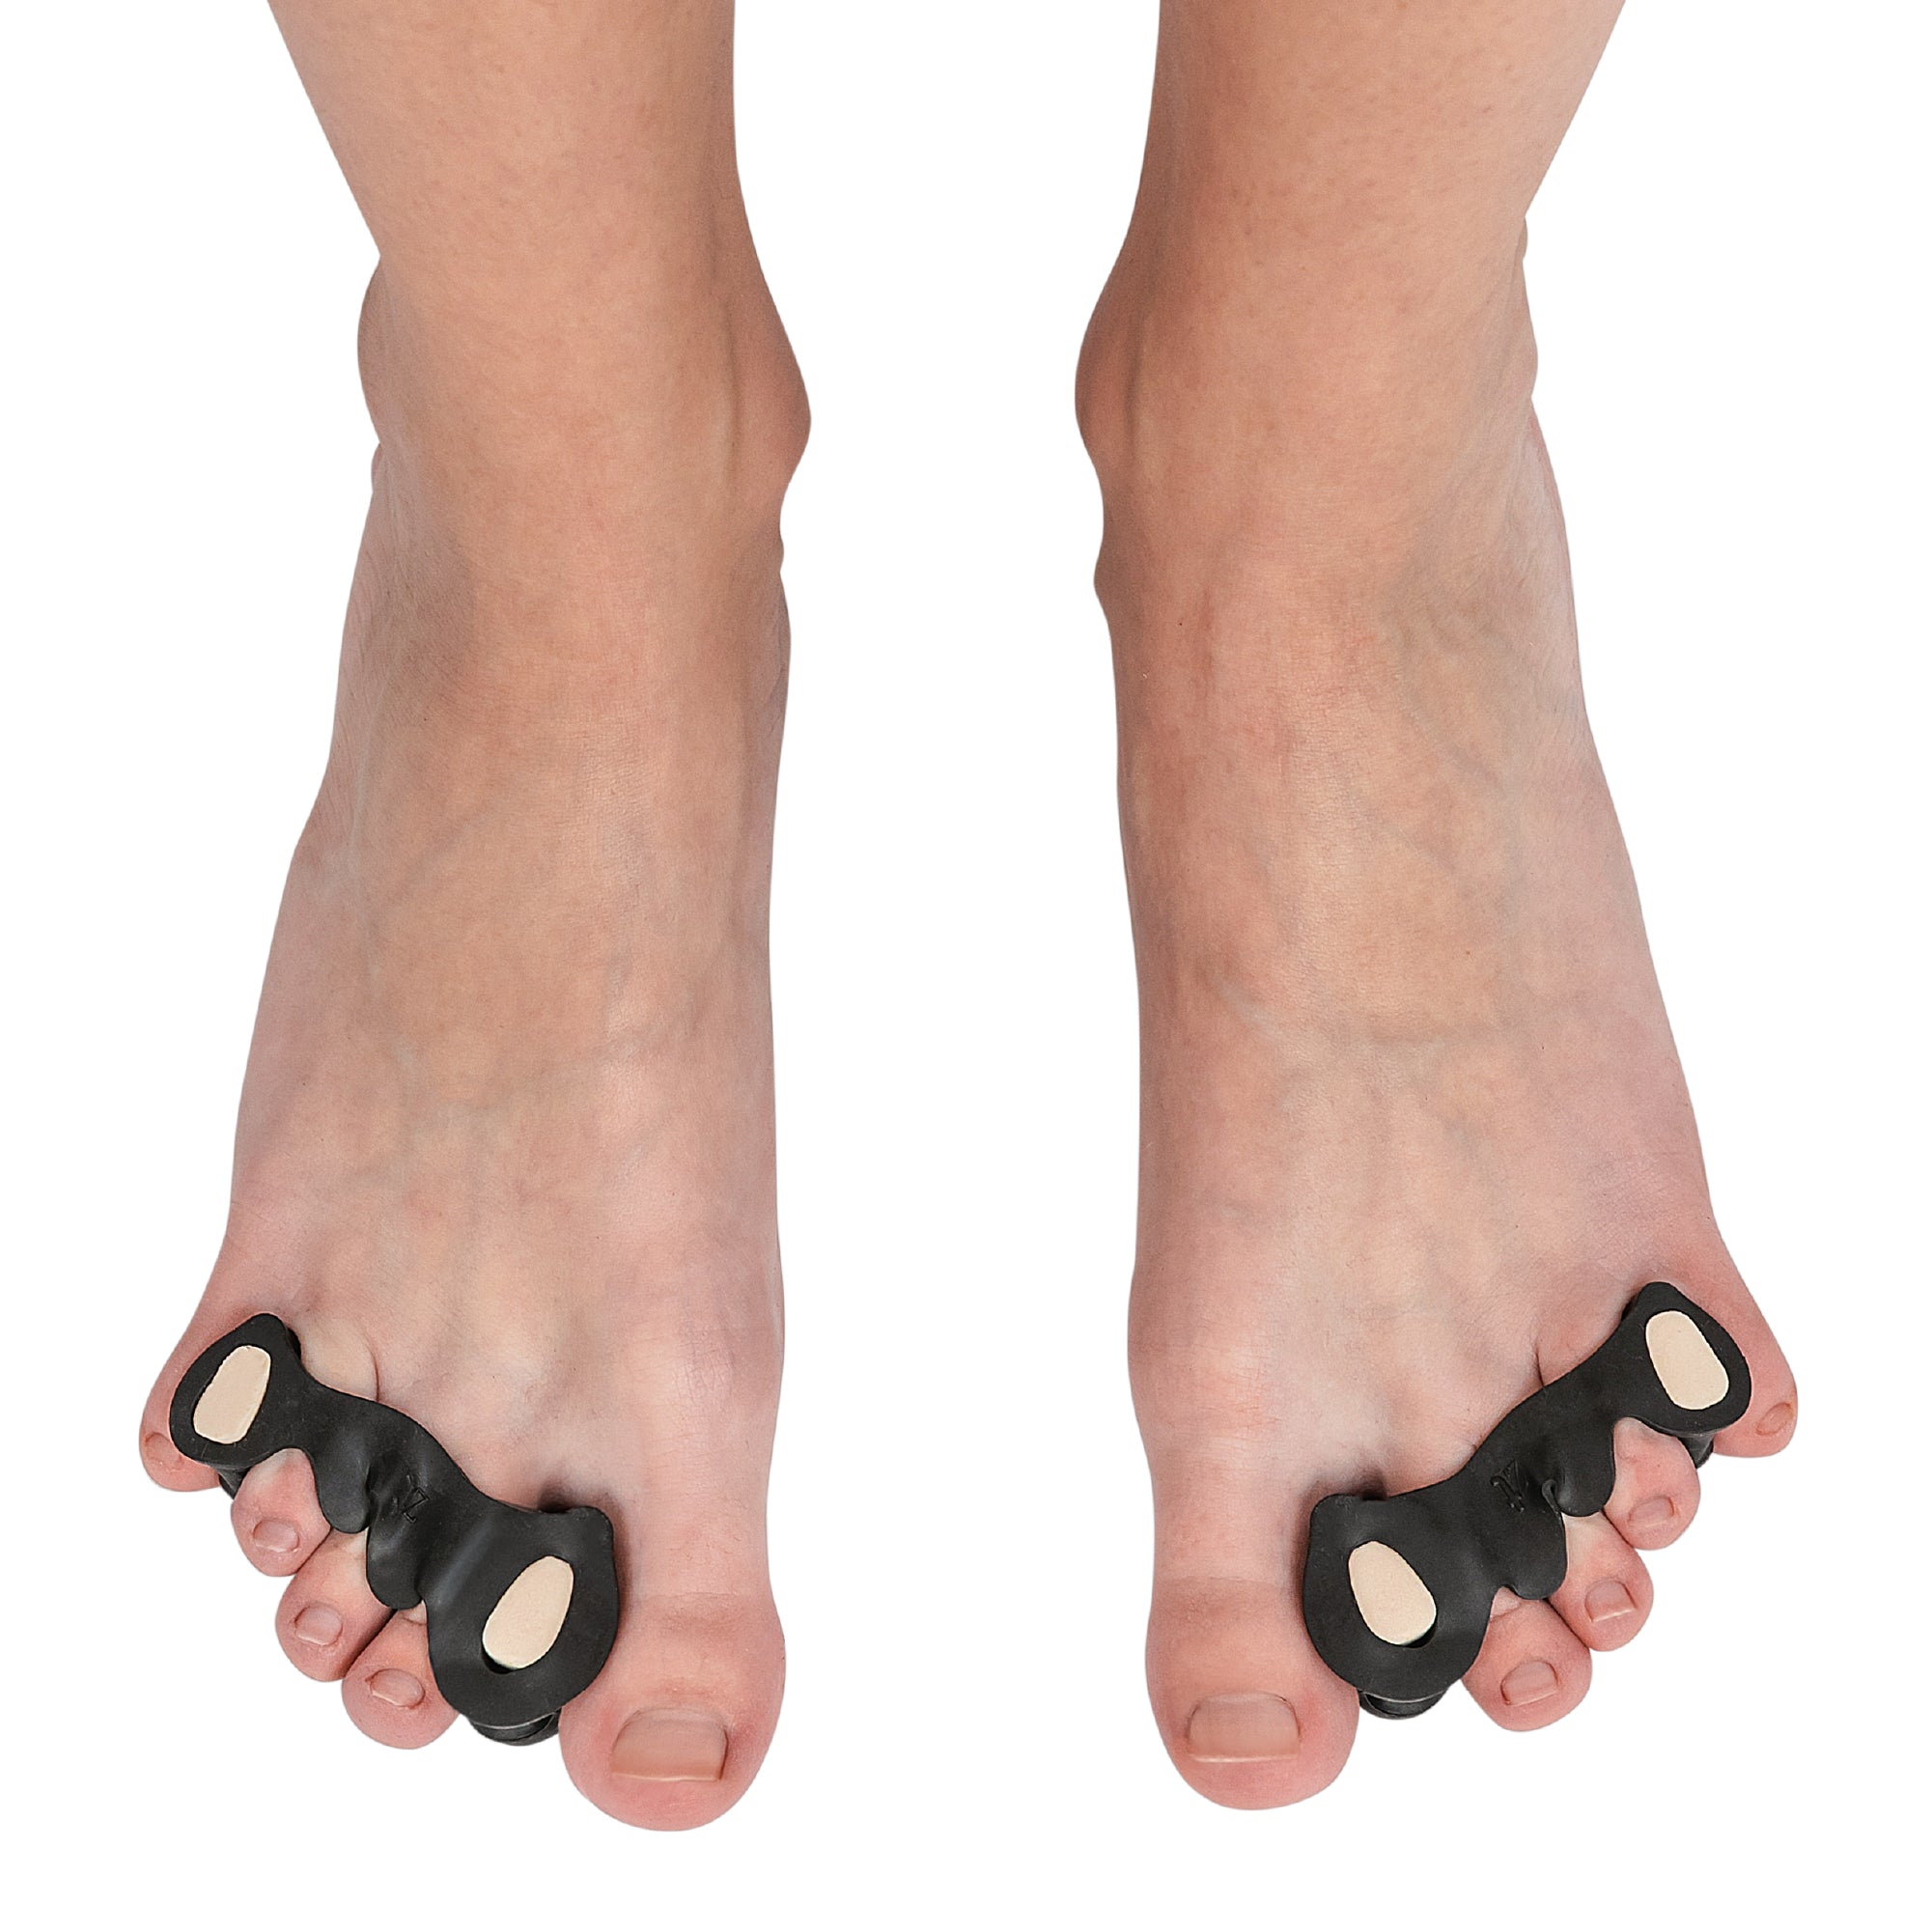 NEW! Customizable Toe Separators with Inserts – ZenToes